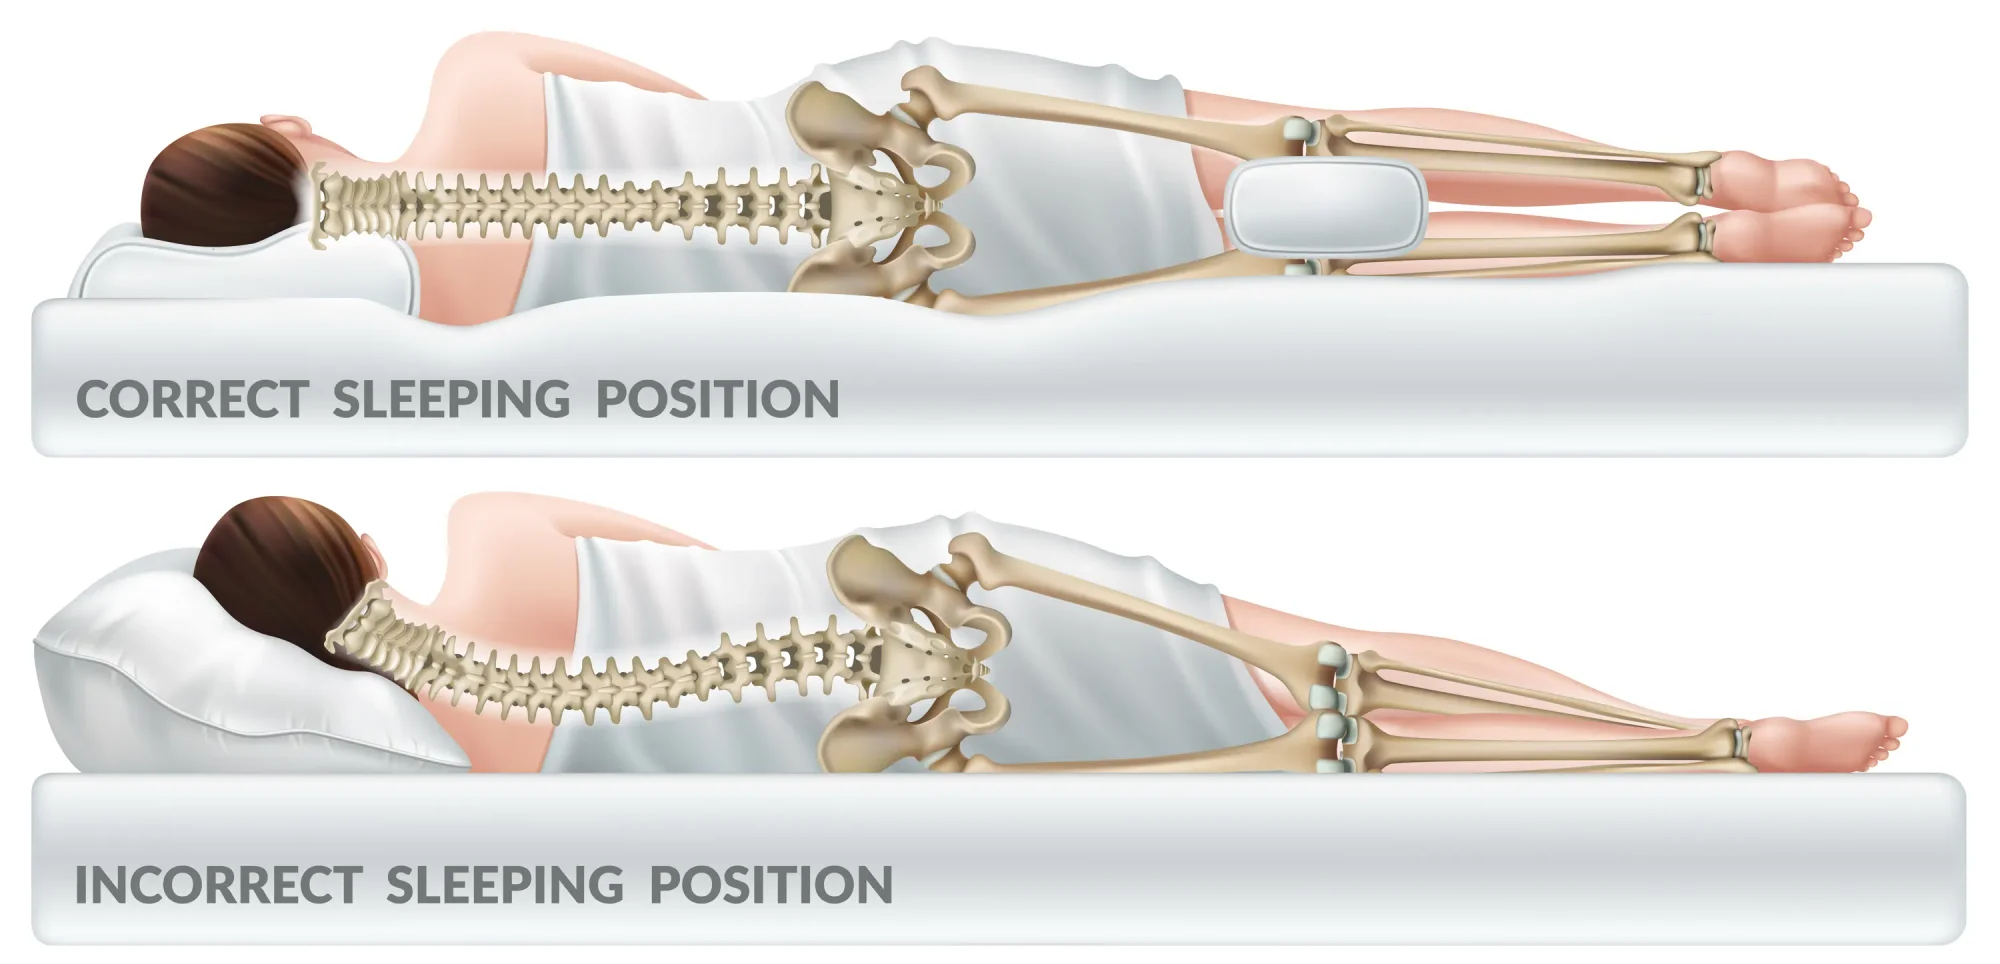 Orthopedic pillow for knees. Correct and incorrect sleeping position legs. Isolated 3d realistic vector illustration.